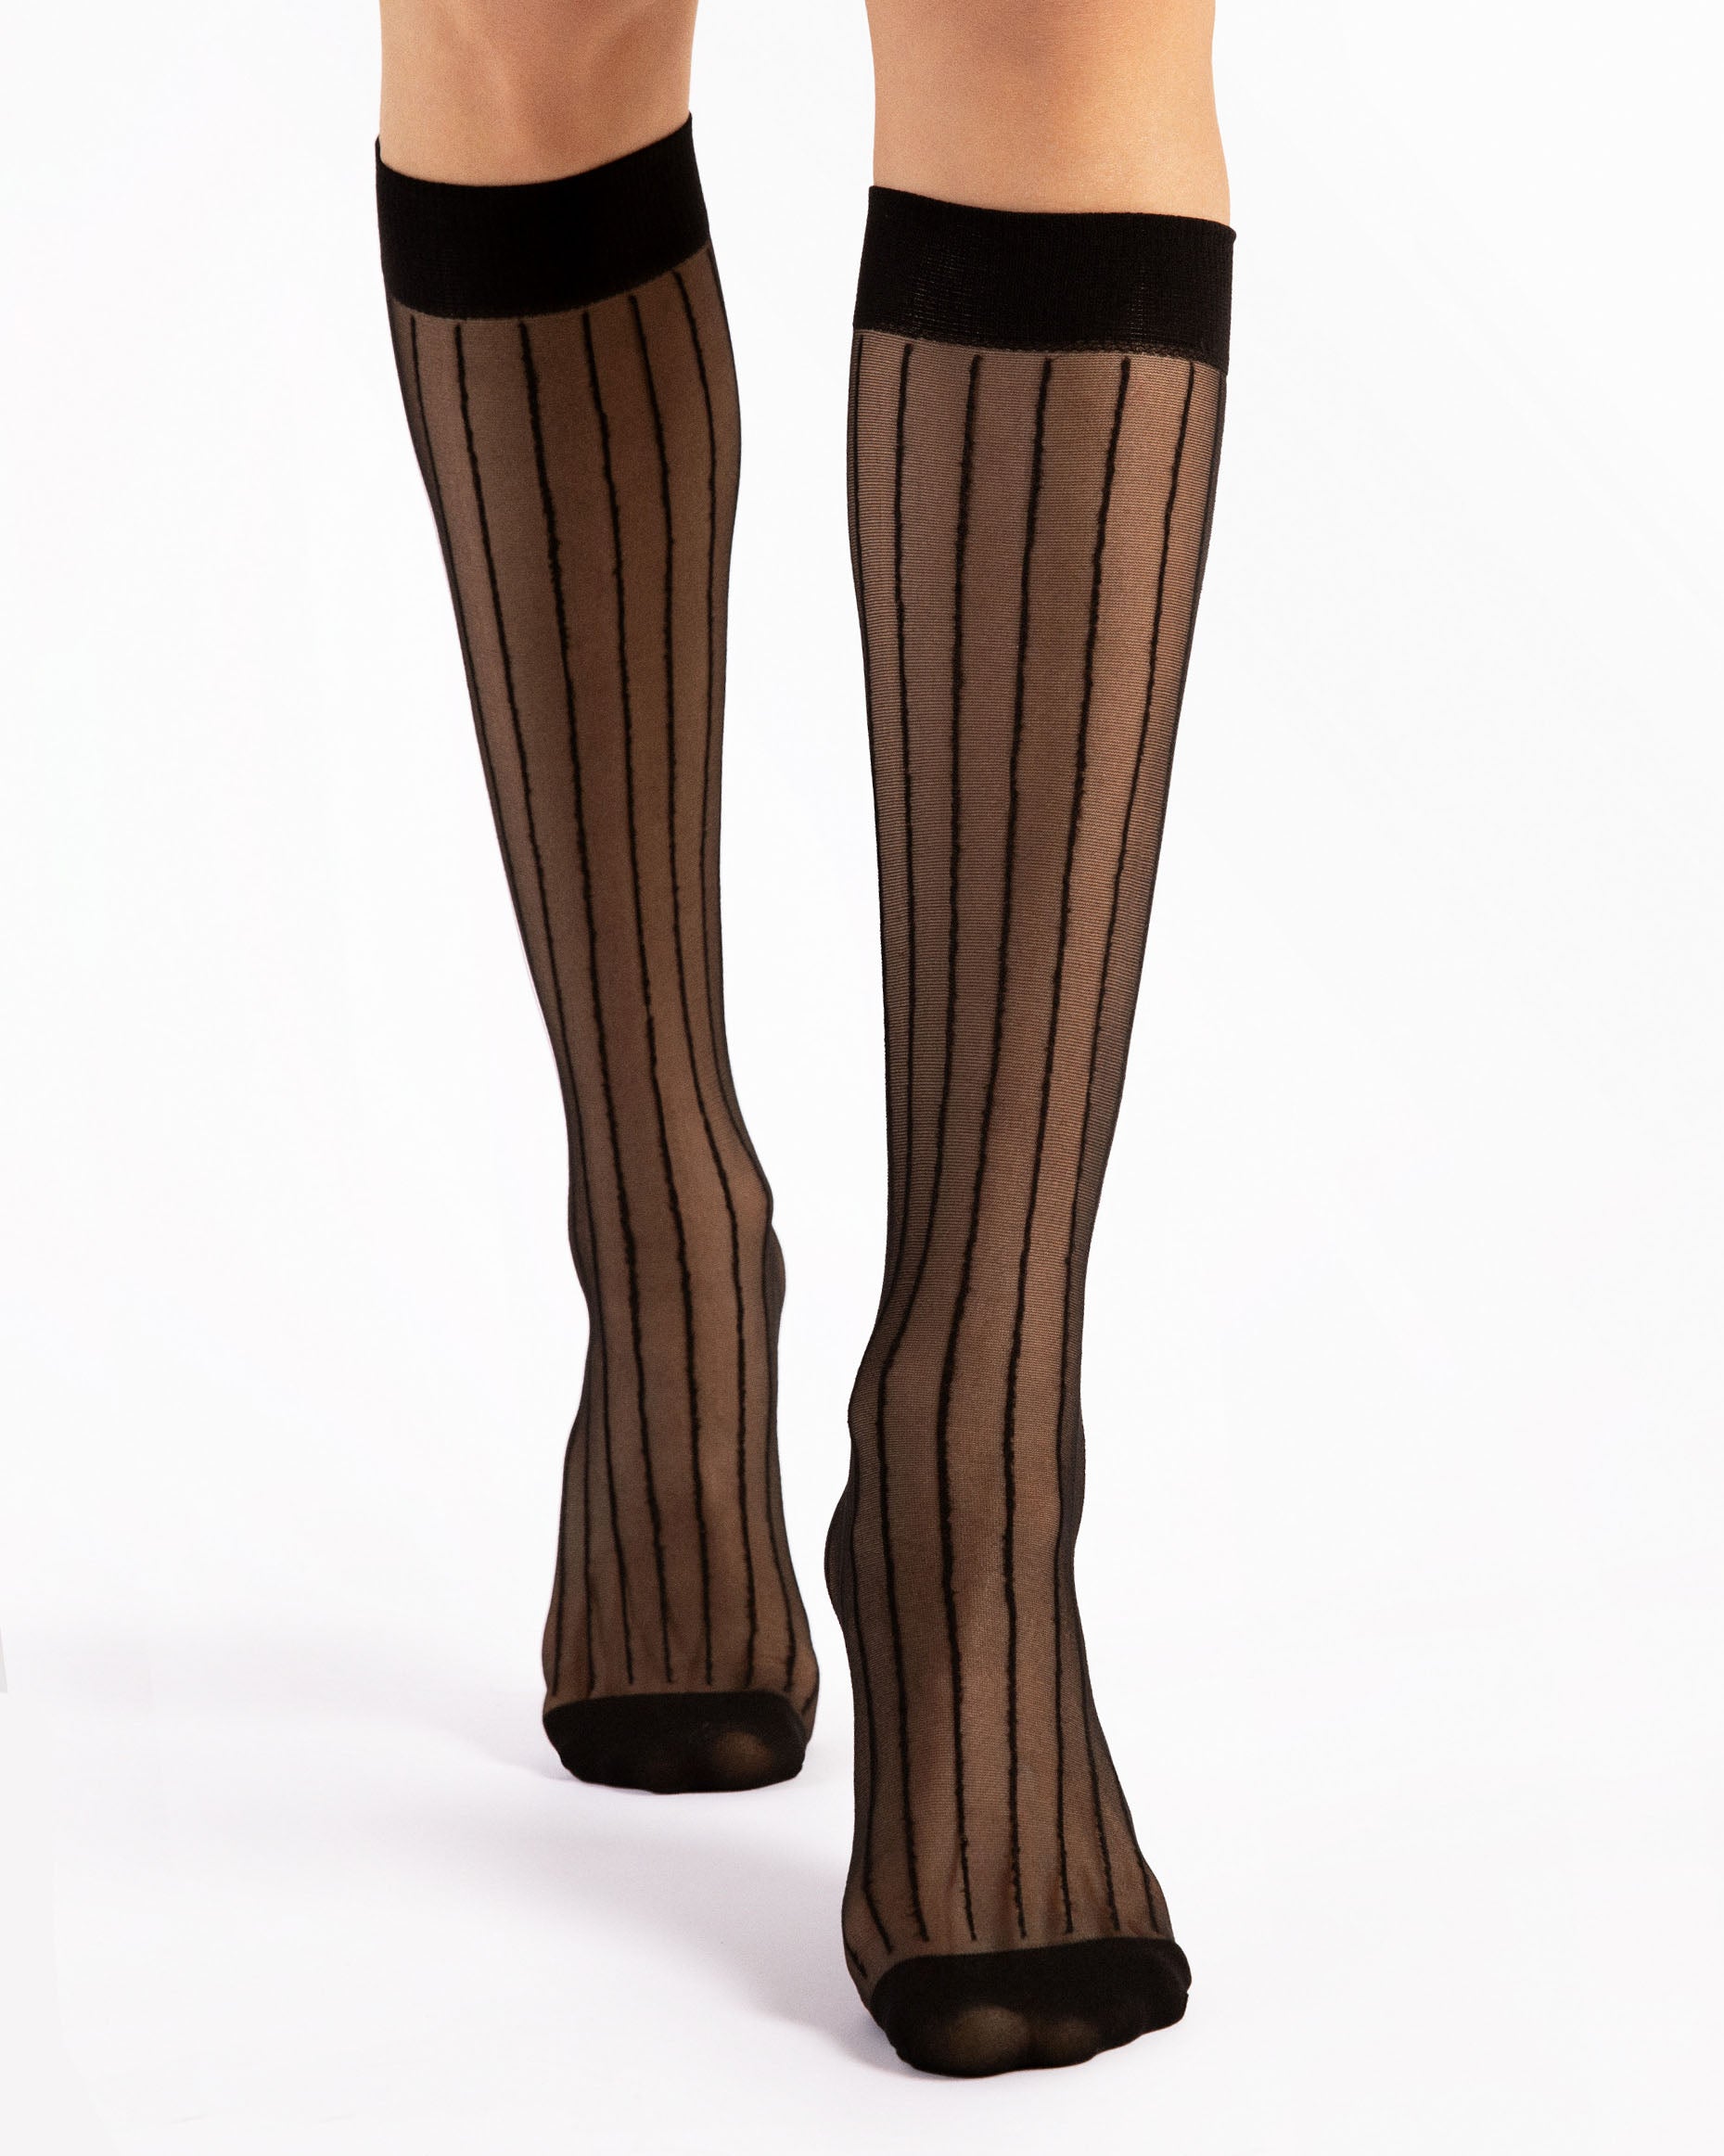 Fiore Linea 15 Den - Sheer black fashion knee-high socks with a thin vertical pinstripe pattern, plain elasticated cuff and sheer reinforced toe.